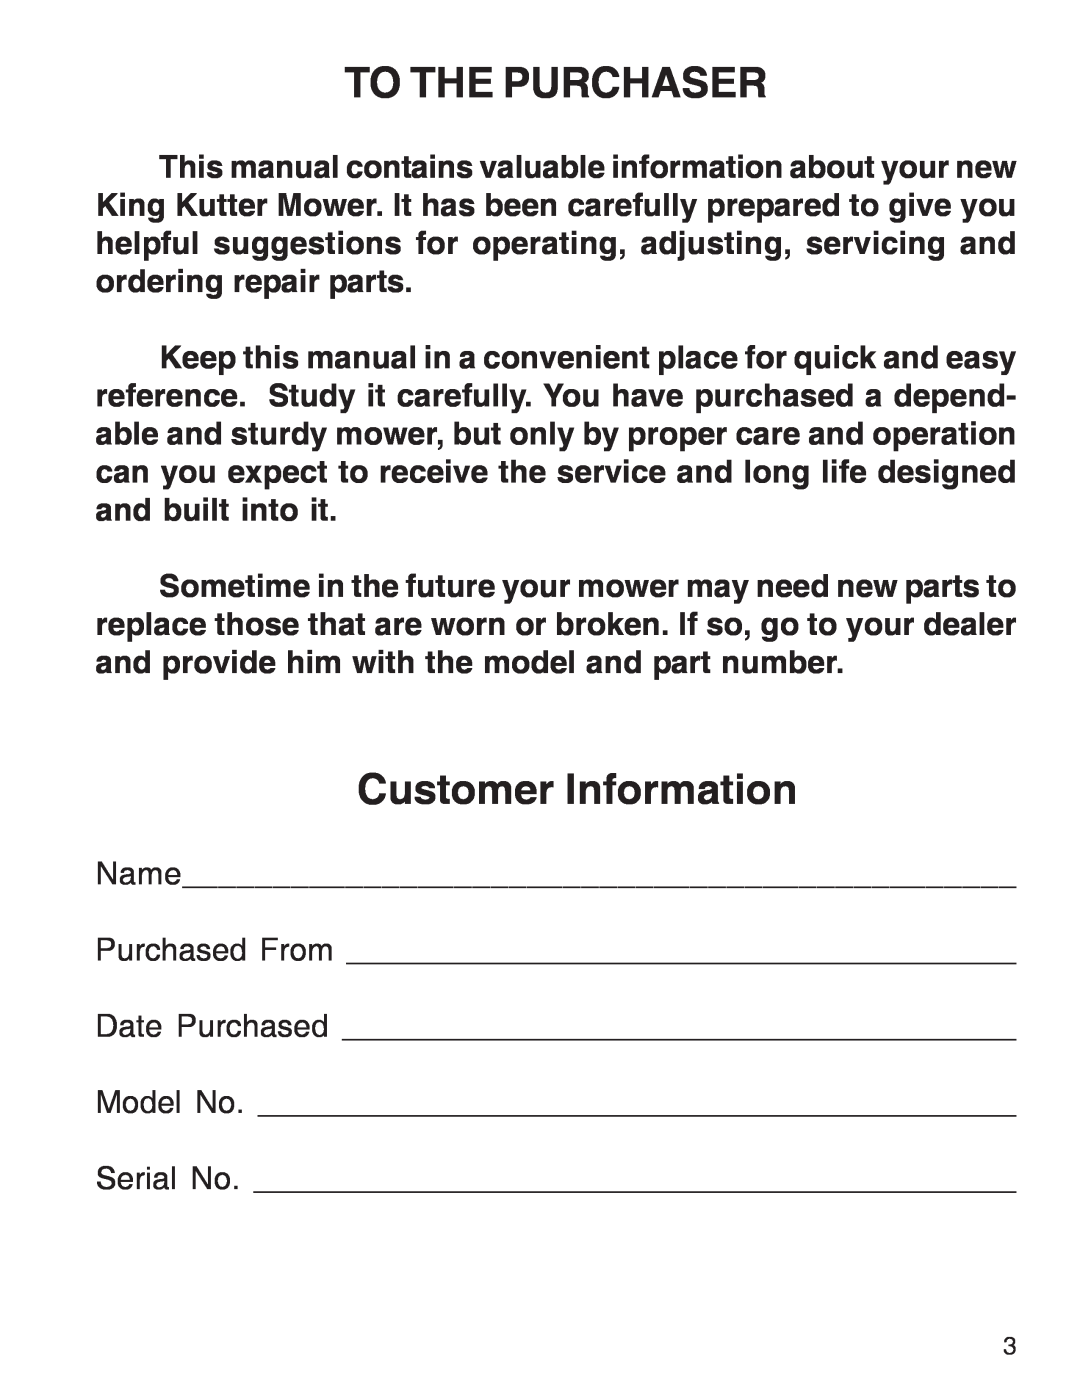 King Kutter Rotary Mower To The Purchaser, Customer Information, Name Purchased From Date Purchased Model No Serial No 